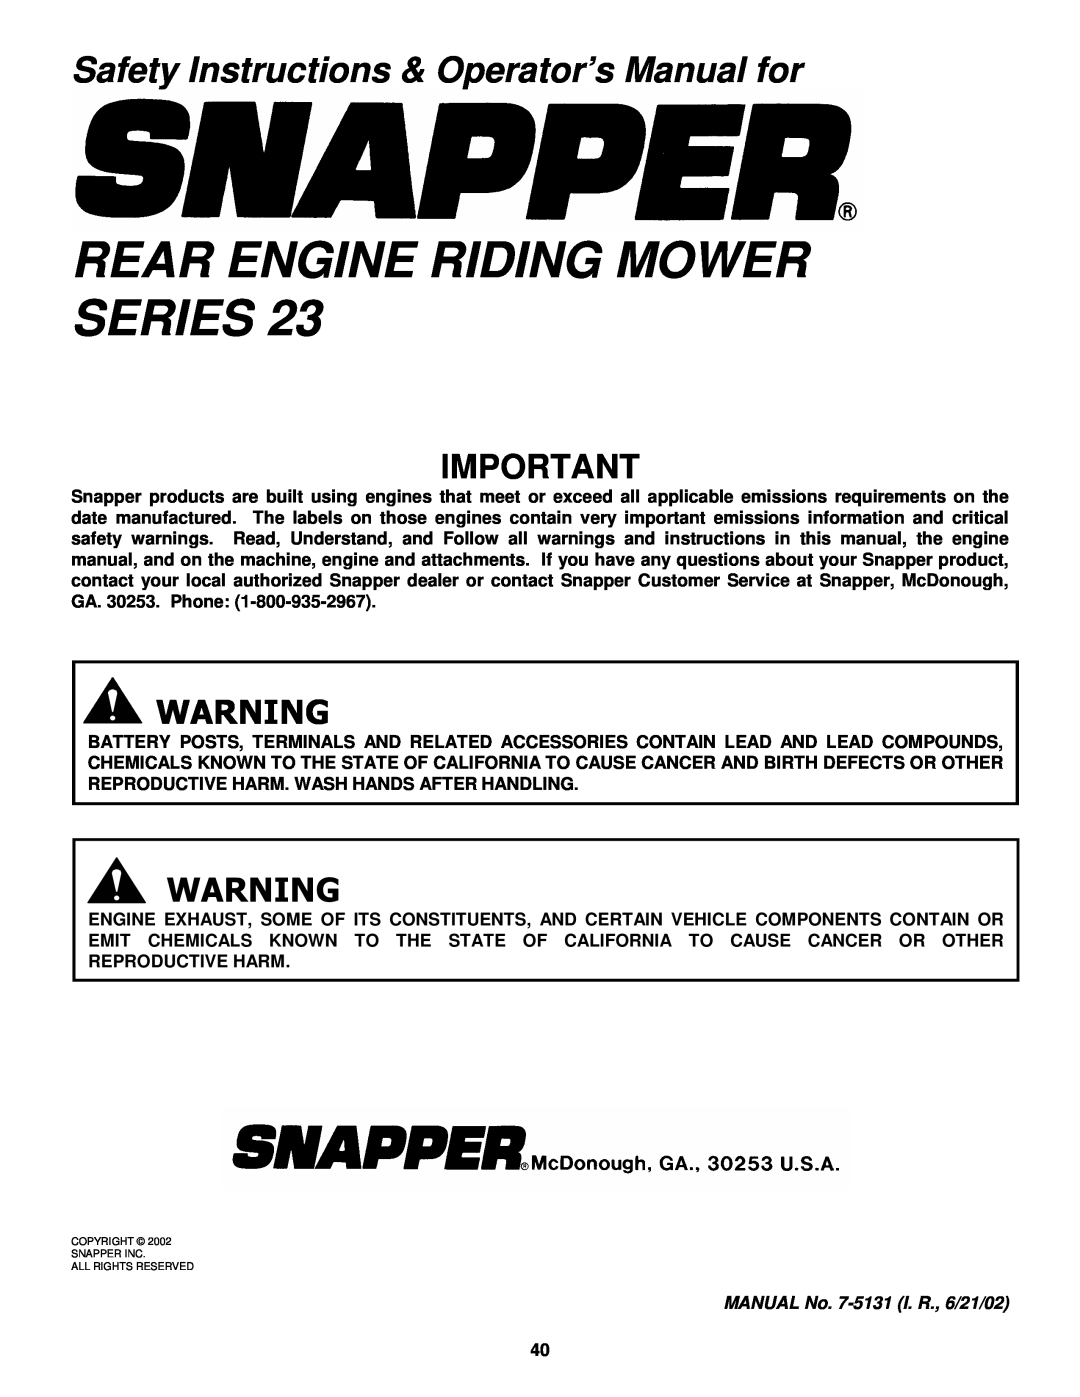 Snapper 421823BVE, W421623BVE Rear Engine Riding Mower Series, Safety Instructions & Operator’s Manual for 